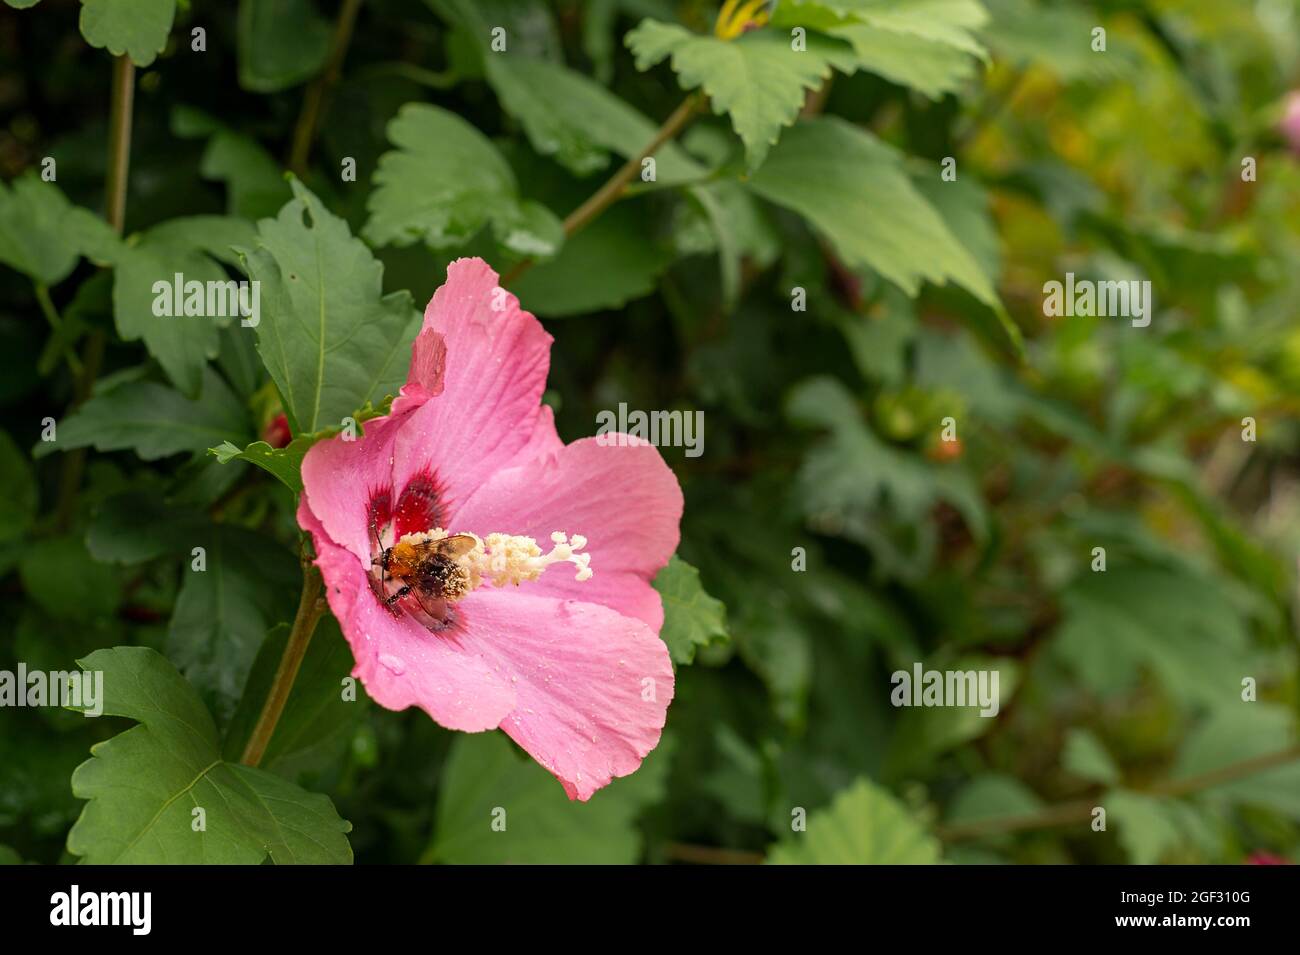 Bee collecting a hibiscus flower, Alsace, France. In the hedge of a garden, this hibiscus flower attracted a bee whose abdomen was loaded with pollen. Stock Photo